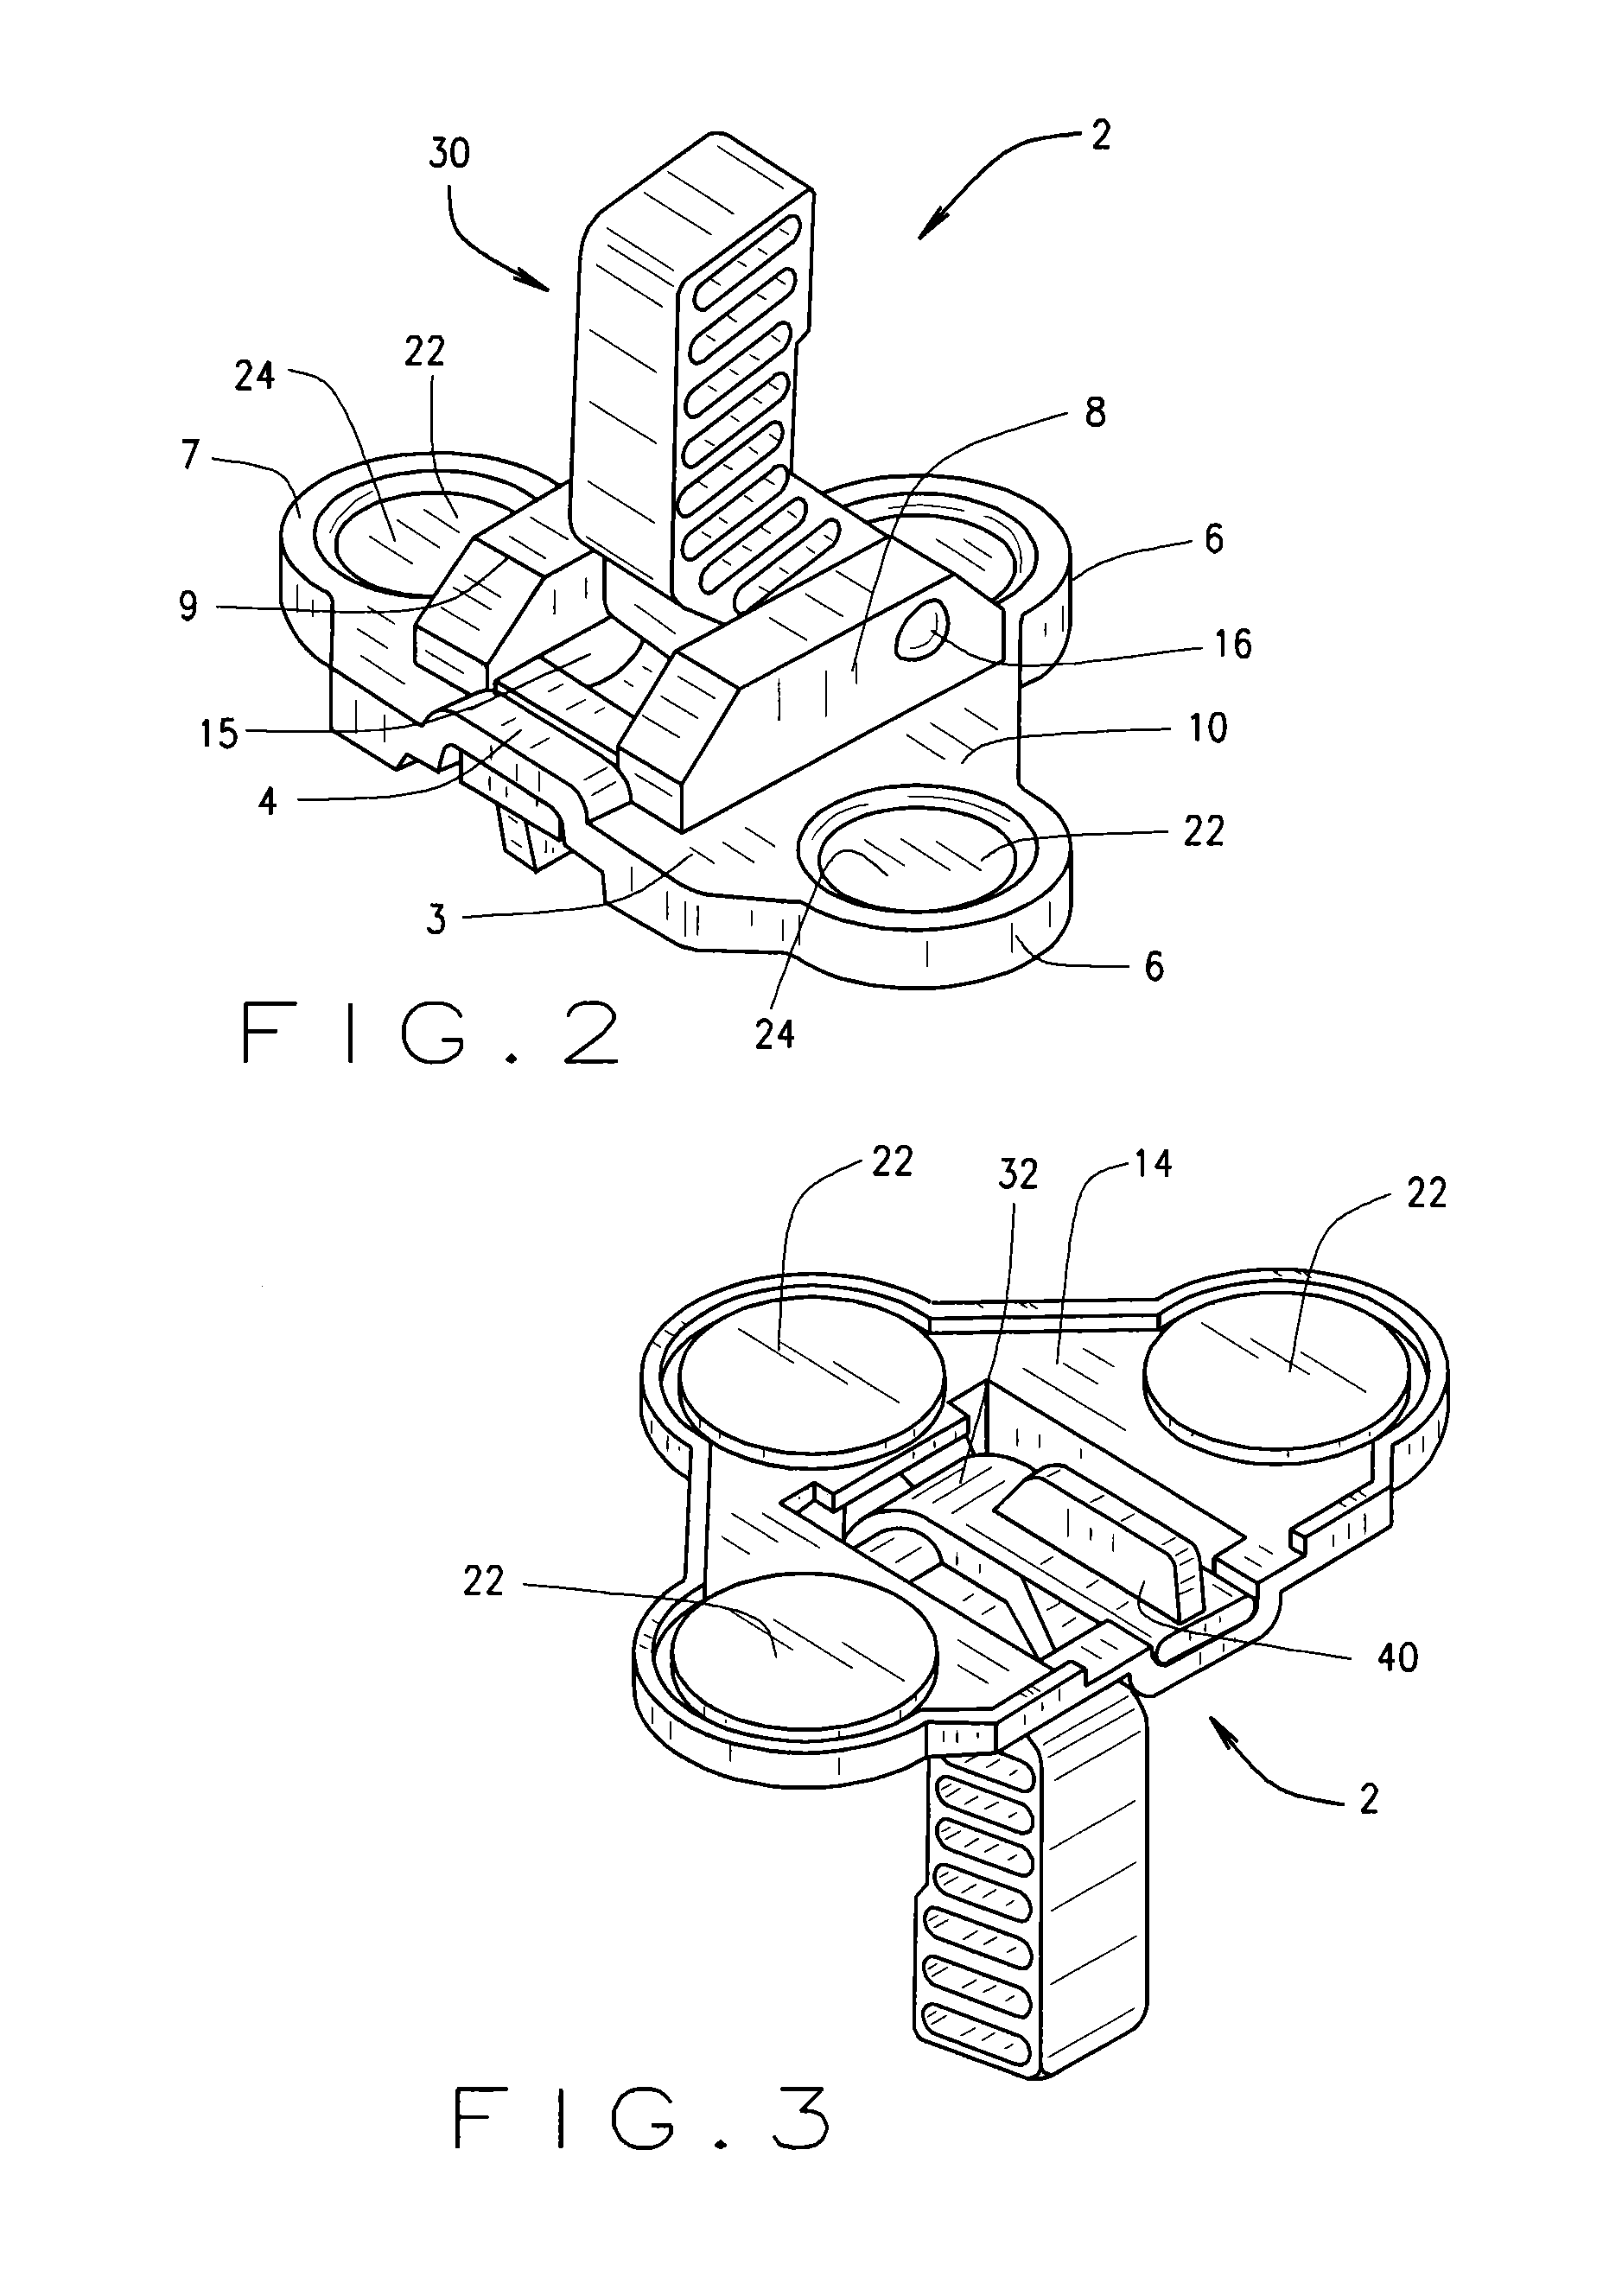 Joystick for a computer keyboard